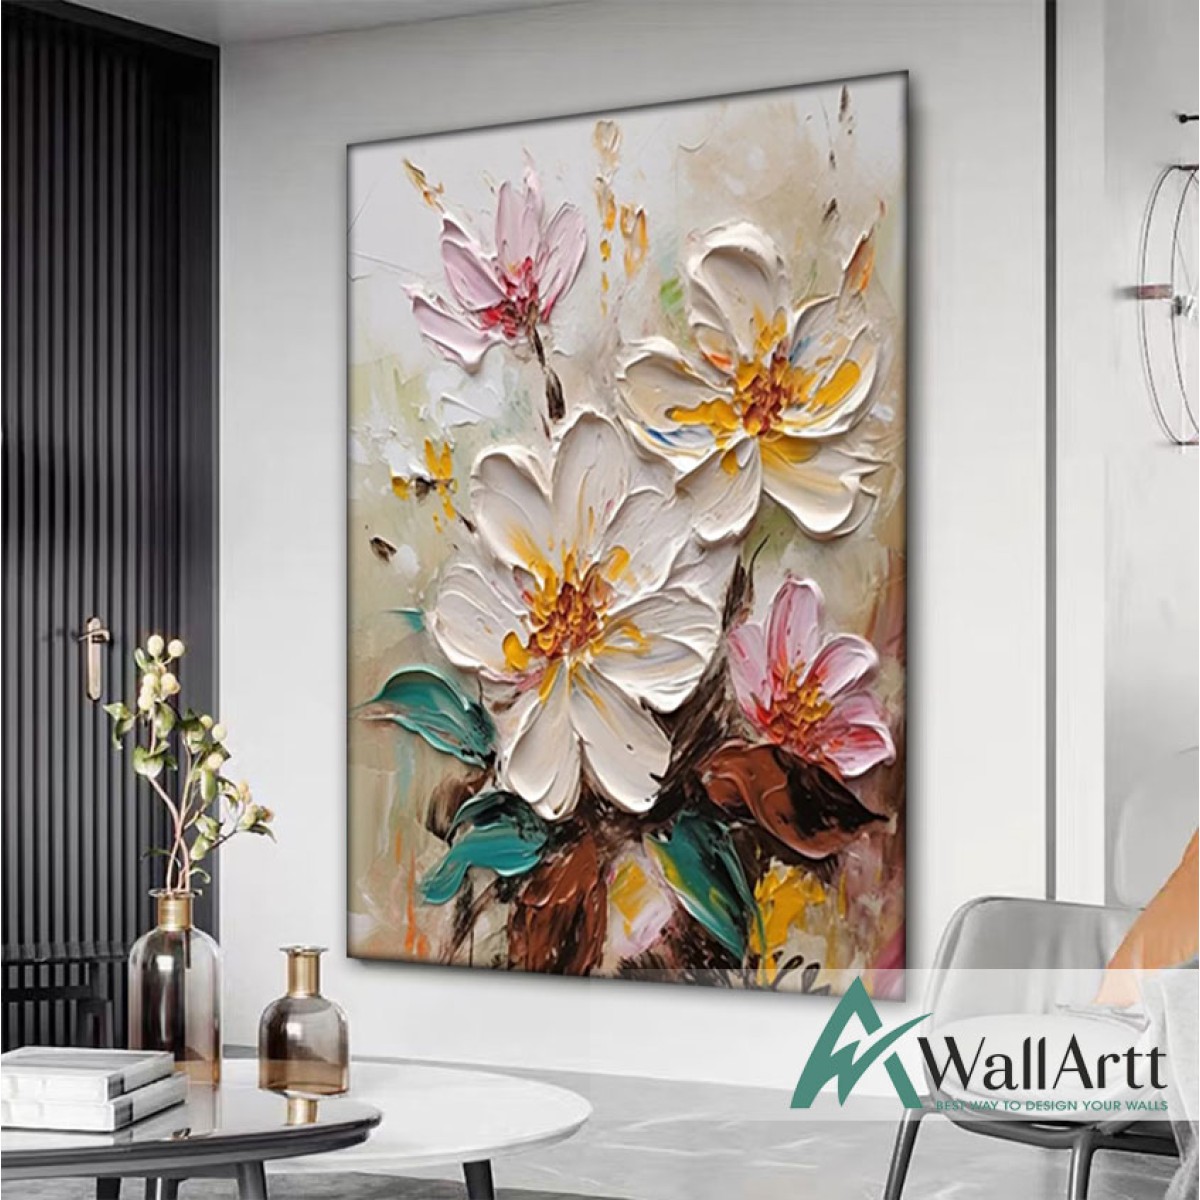 Flowers with Colorful Leaves II 3d Heavy Textured Partial Oil Painting